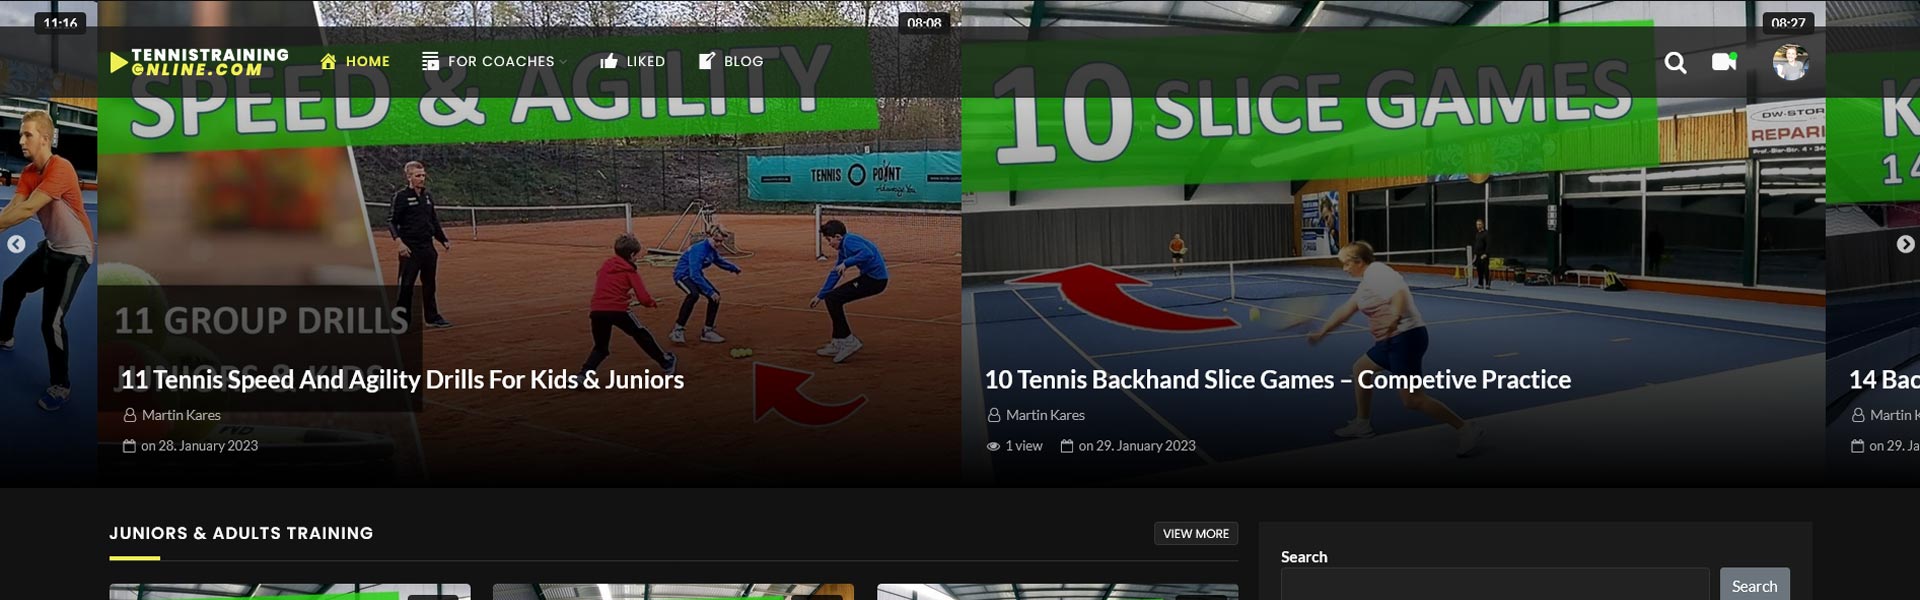 Read Interesting Tennis Tipps and Storys Online